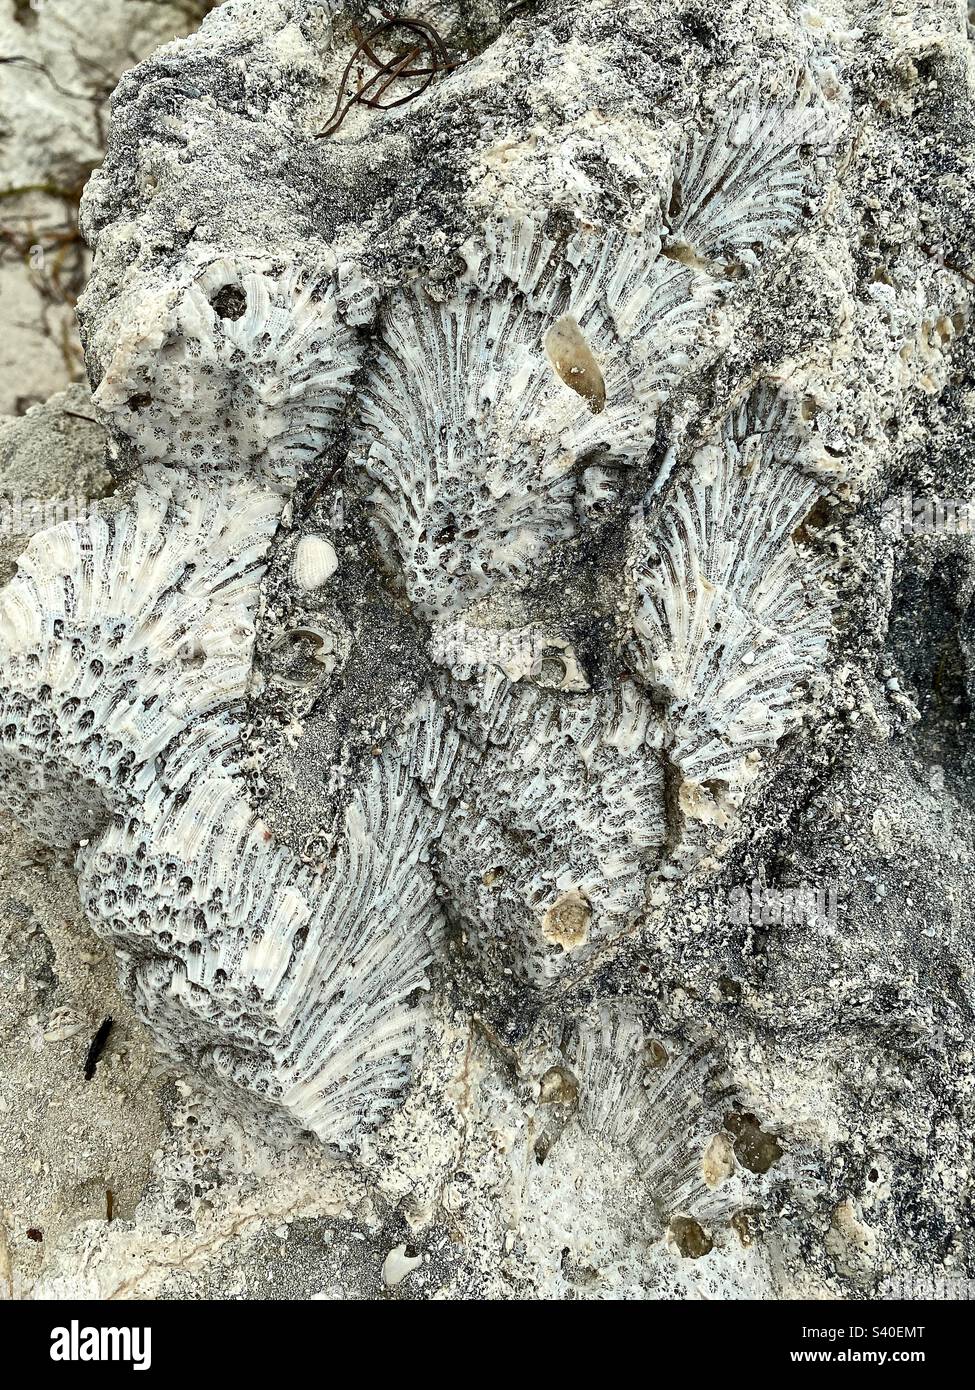 Fossilized coral in rock at Bahia Honda State Park on Big Pine Key in the Florida Keys. Stock Photo